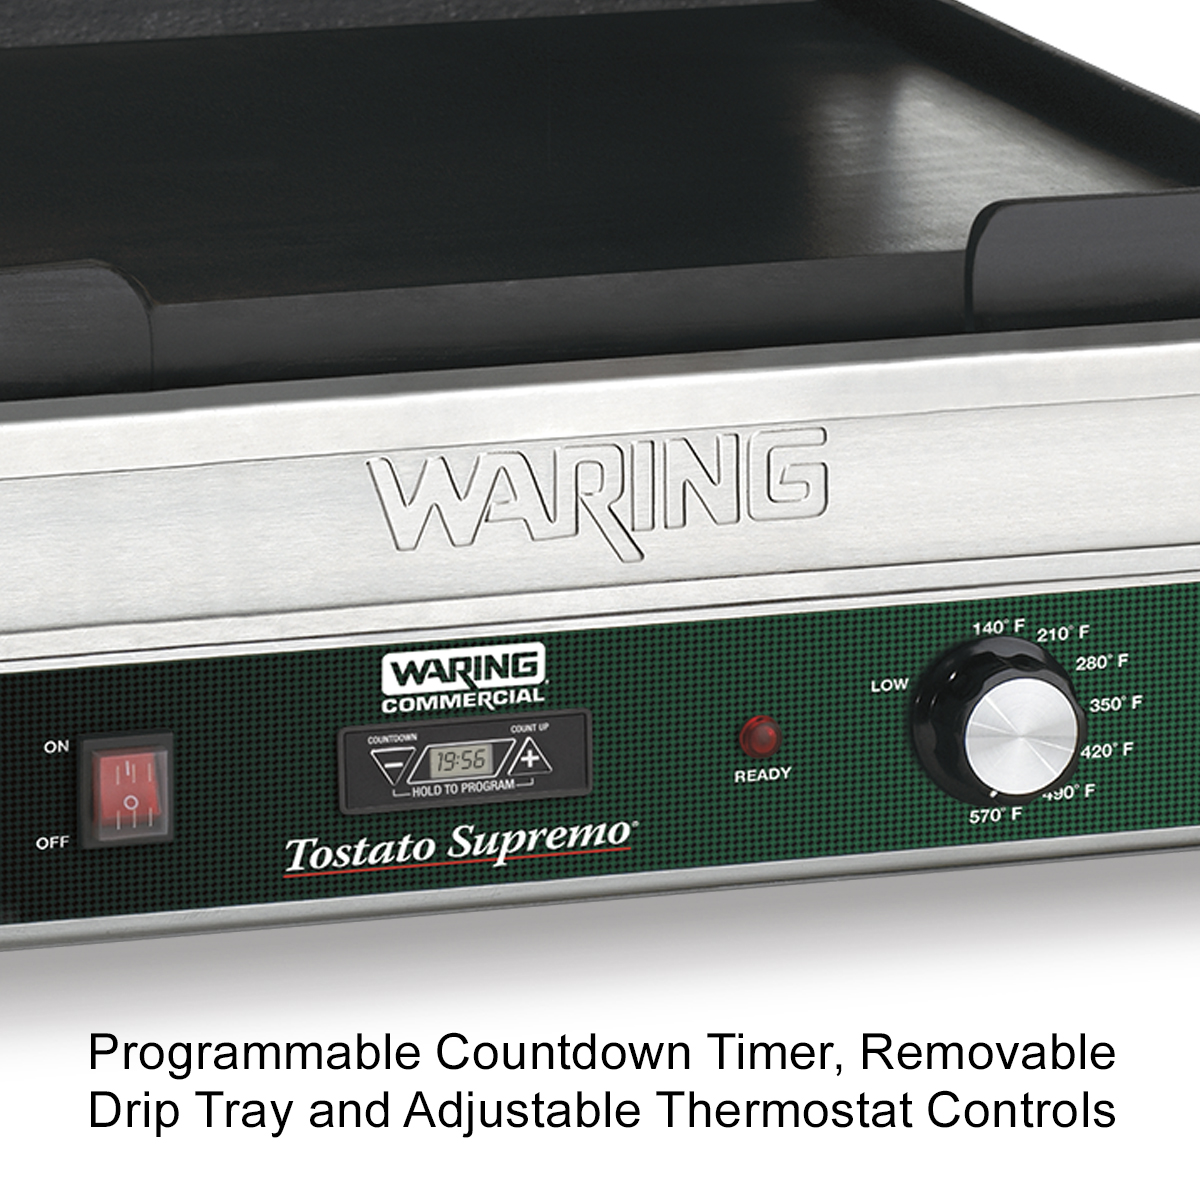 https://www.waringcommercialproducts.com/files/products/wfg275t-waring-full-size-flat-toasting-grill-with-timer-inset3.jpg